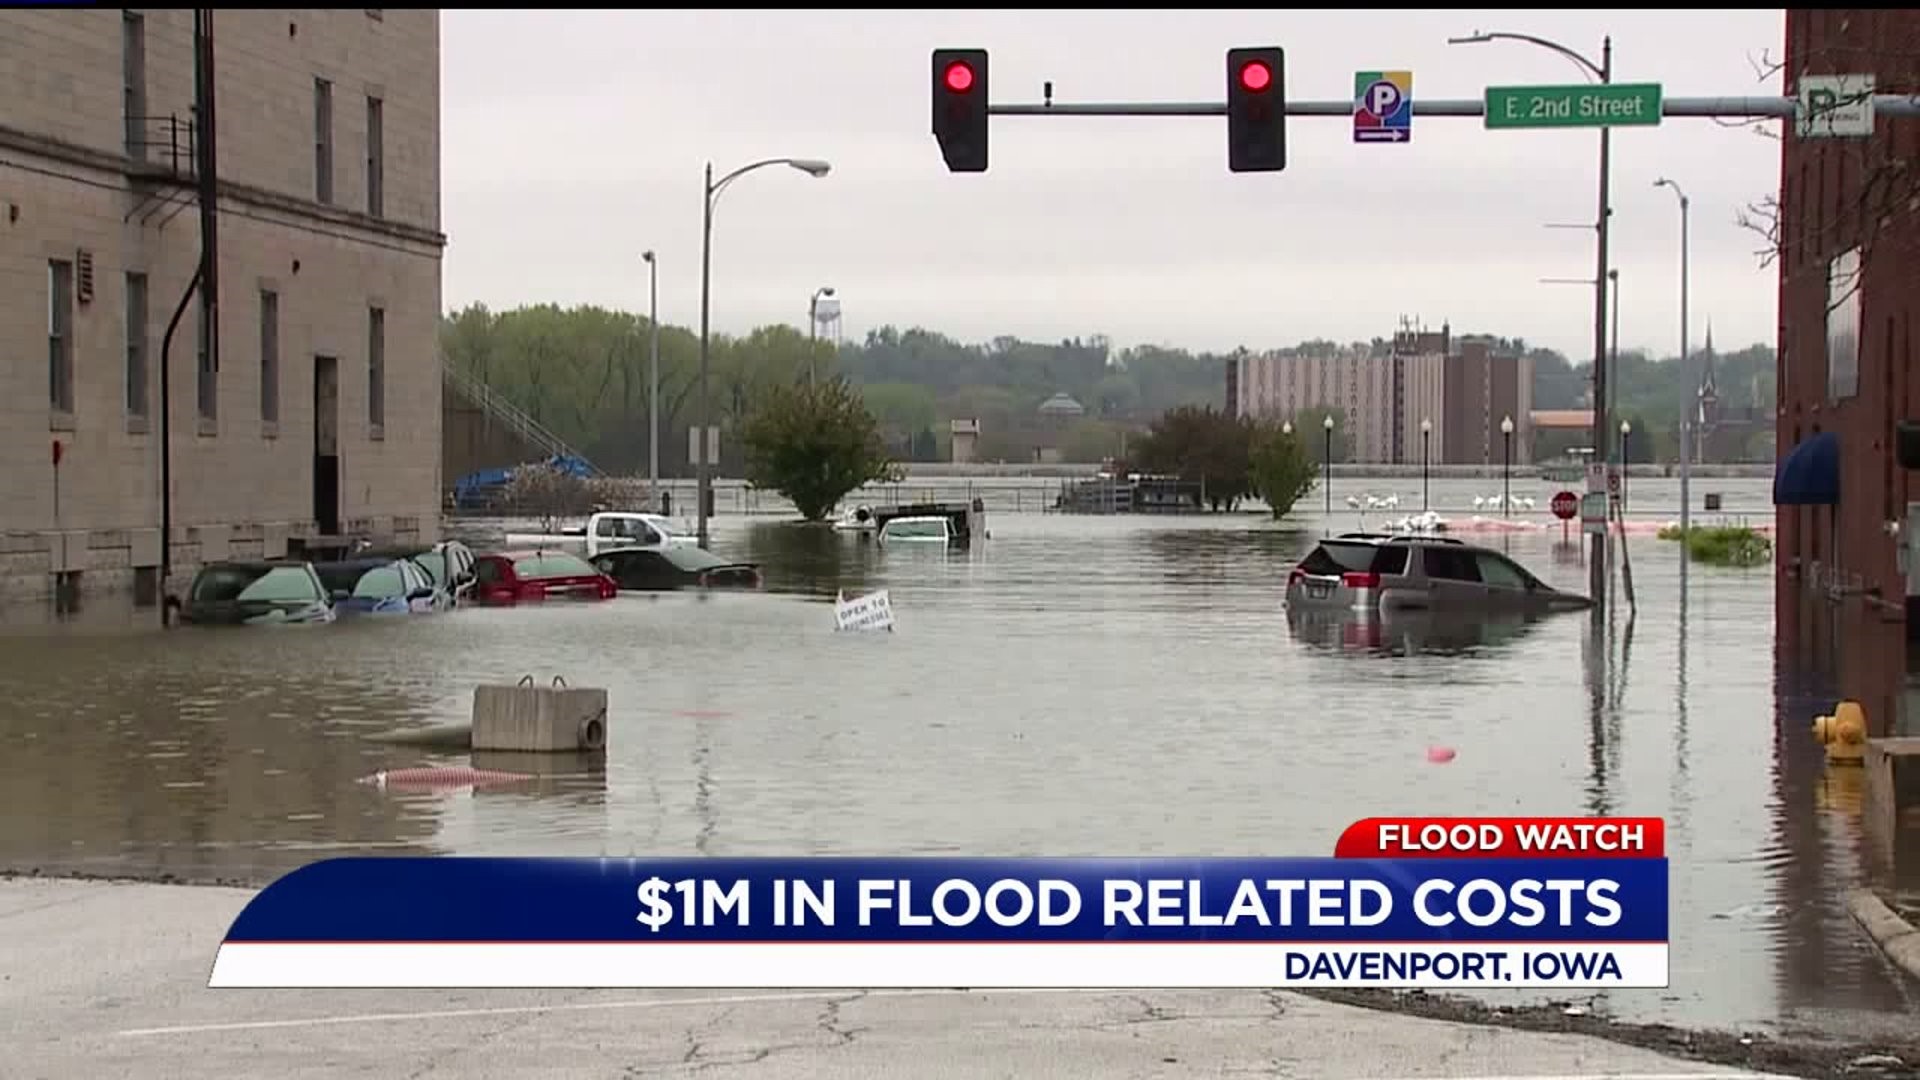 $1 Million spent on flood related costs in Davenport